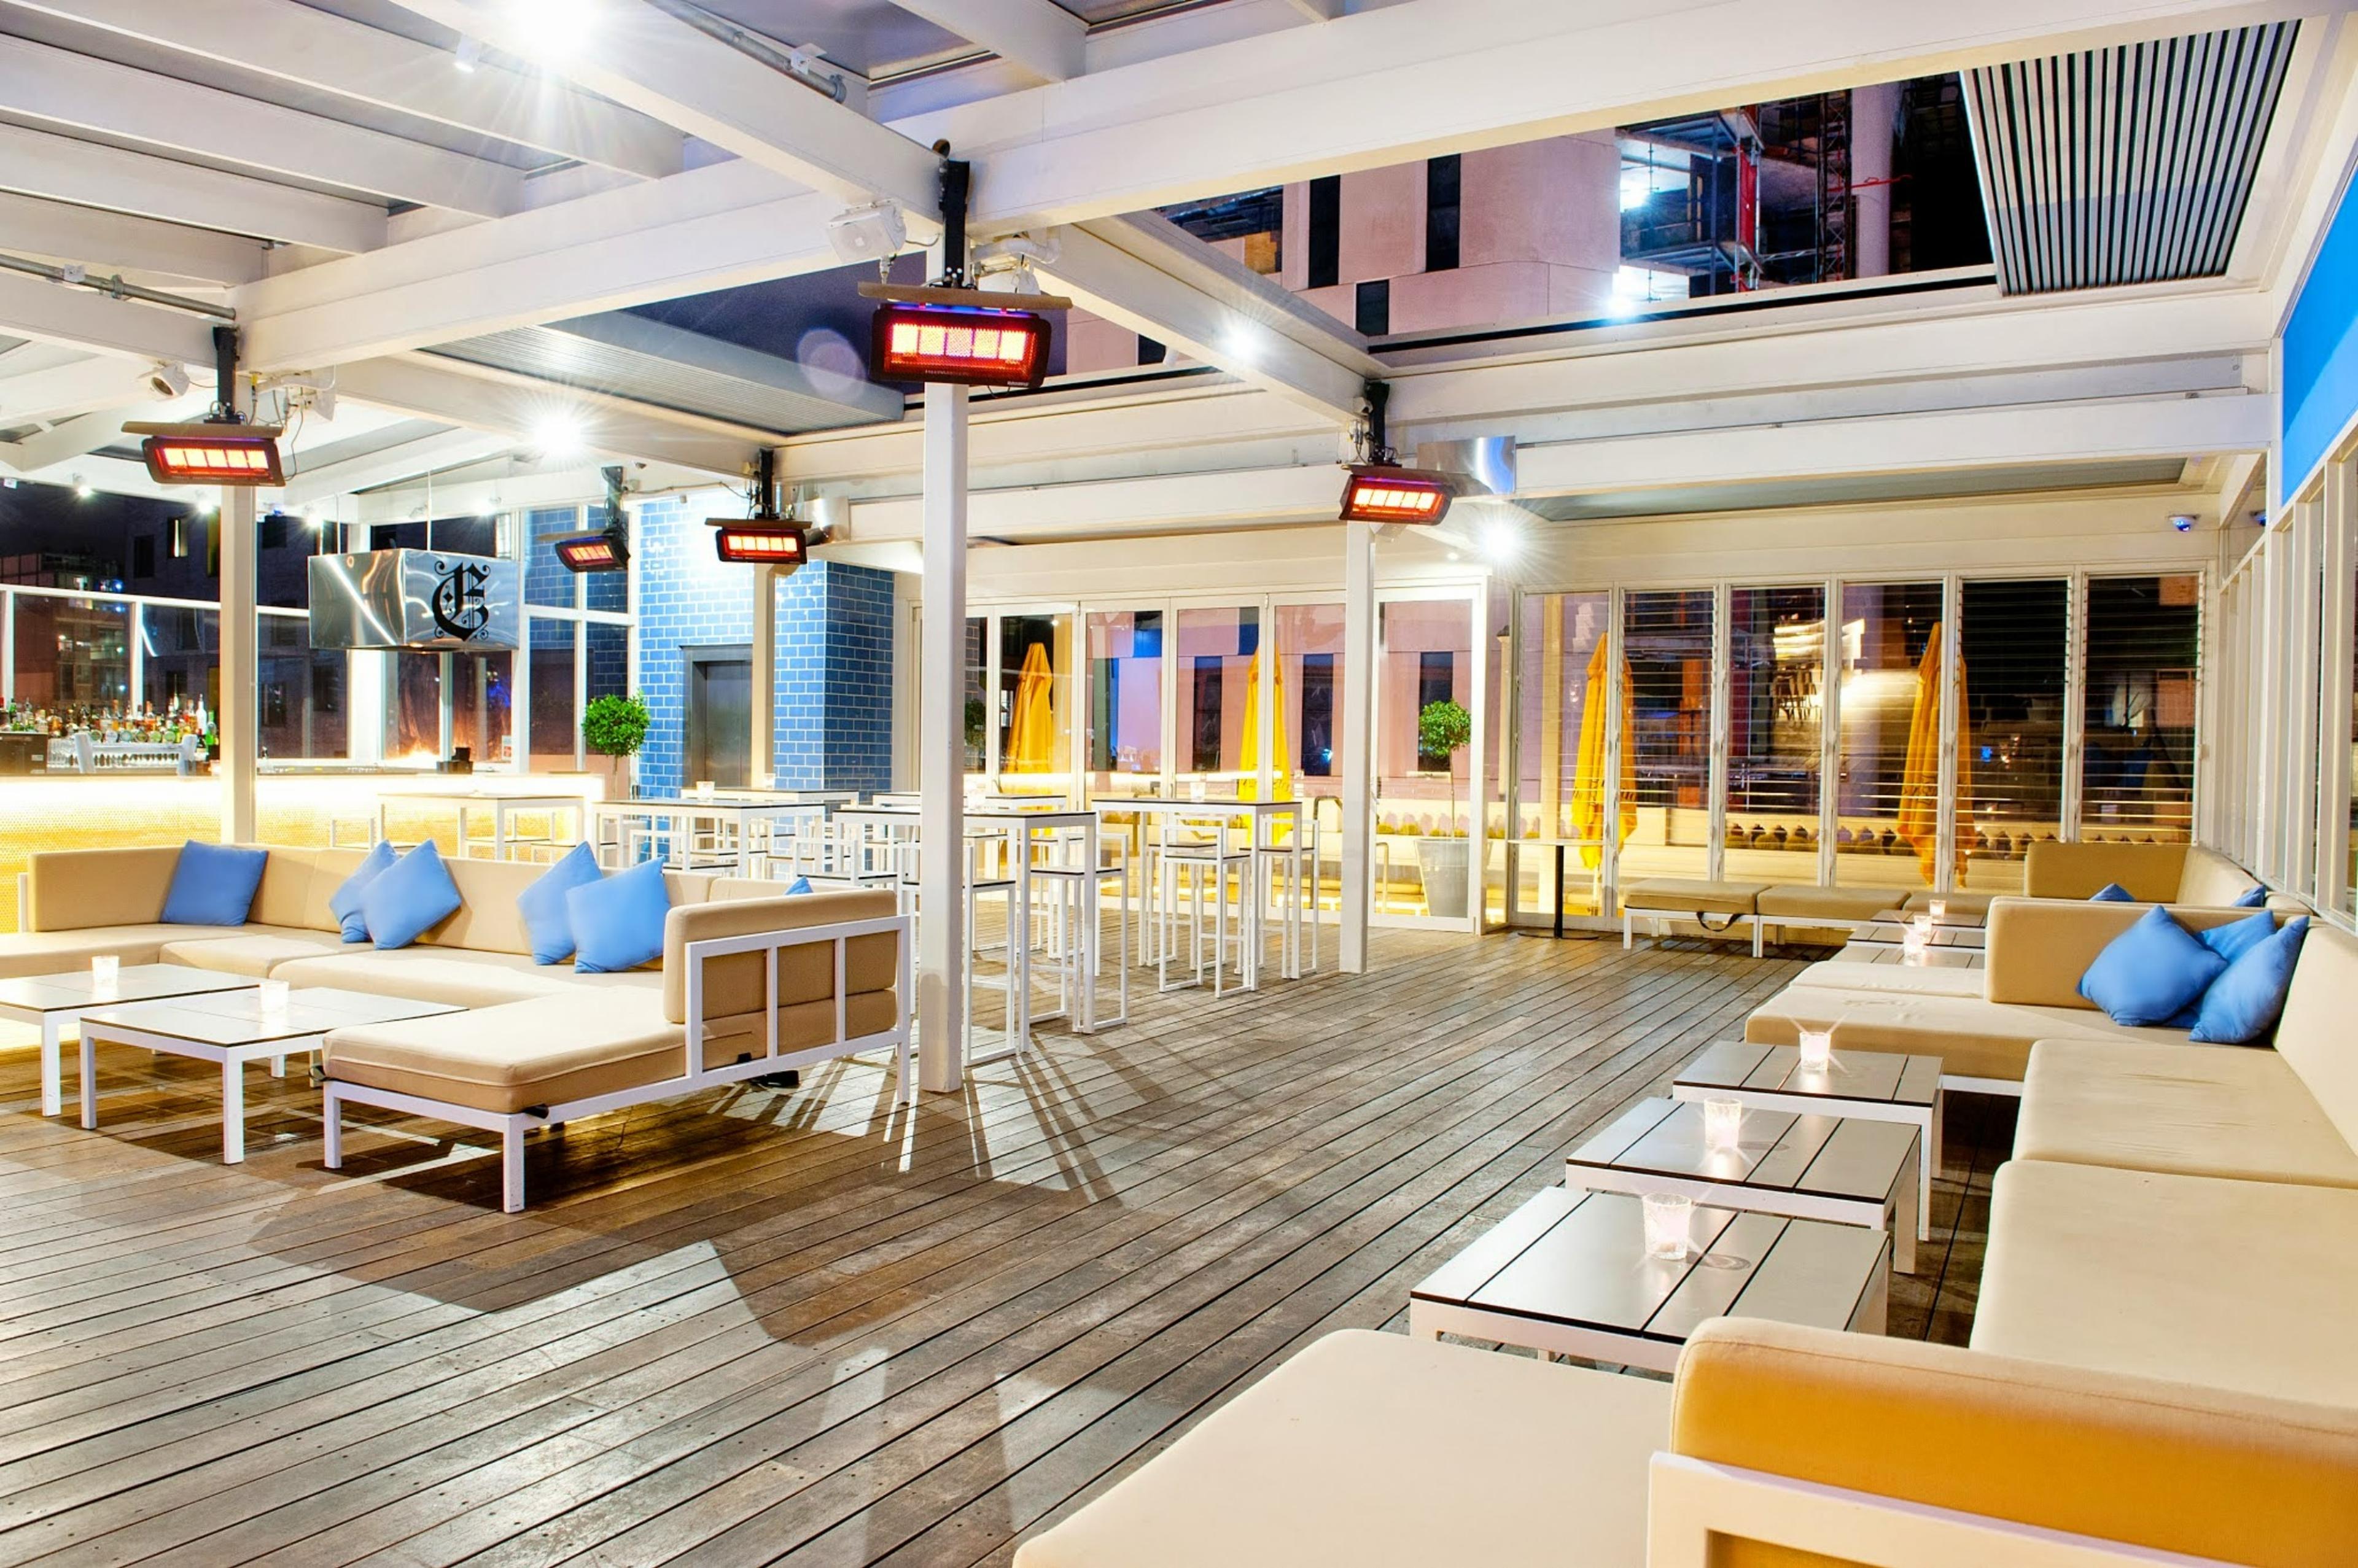 The Emerson Rooftop Bar and Club